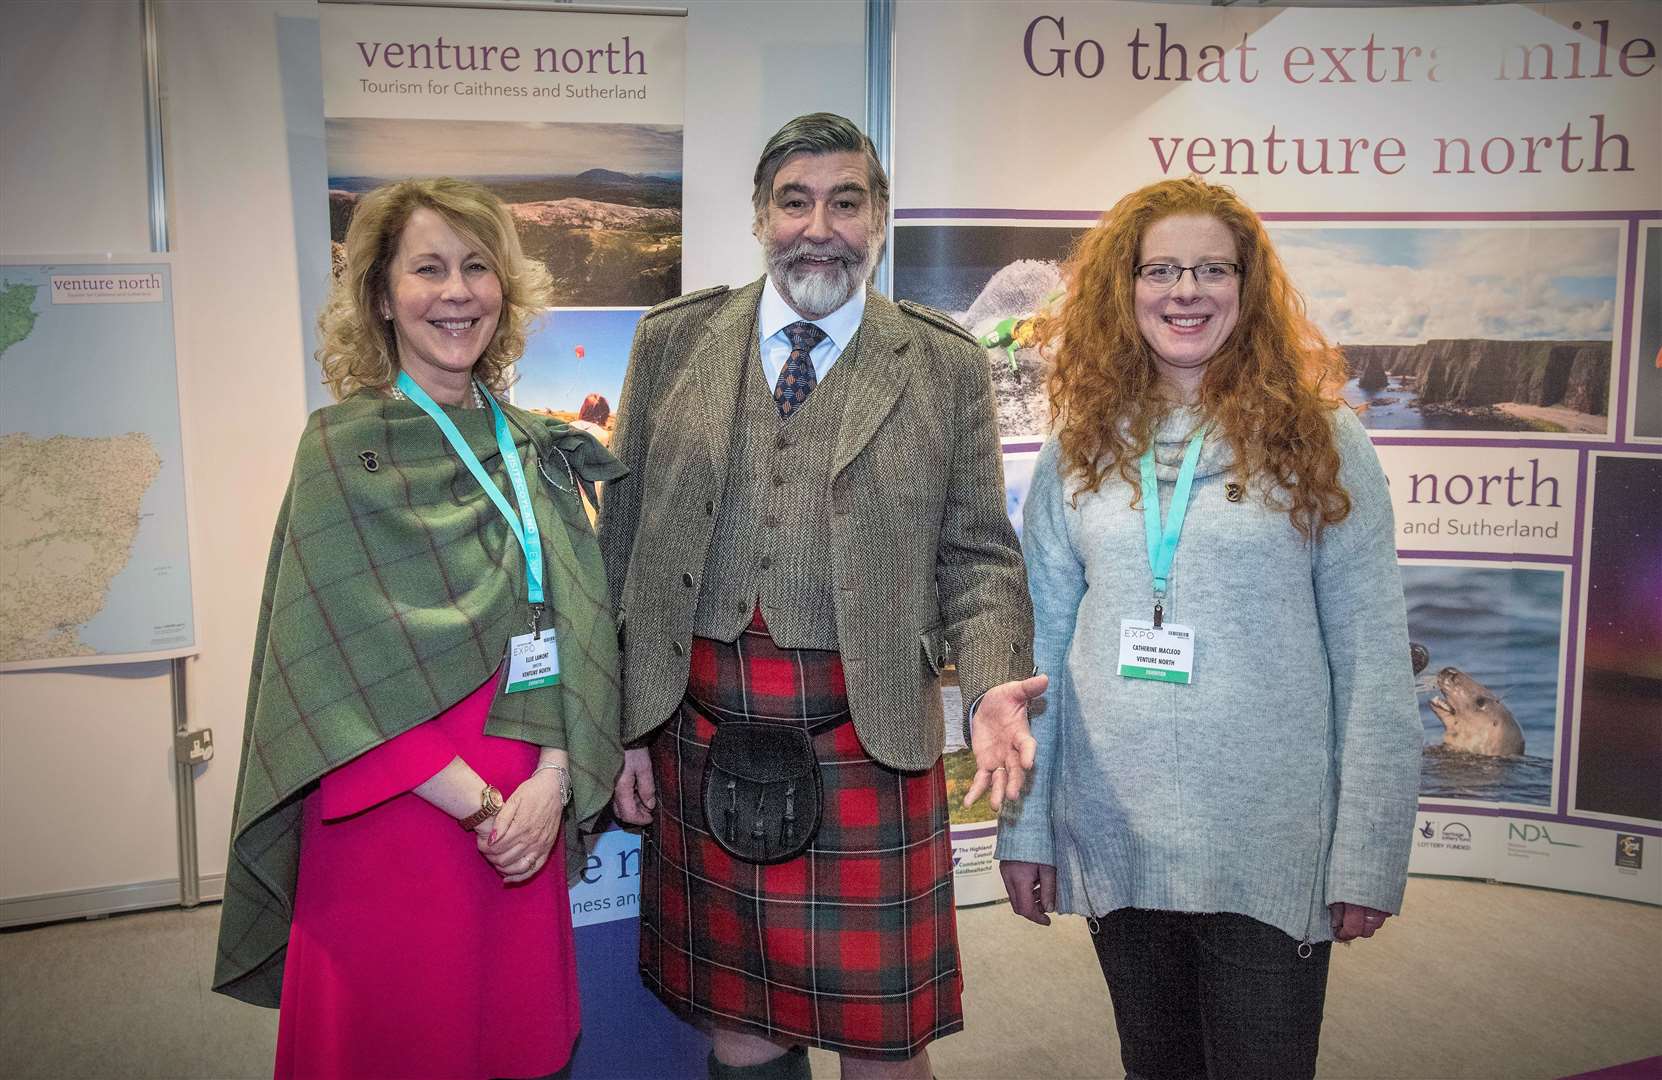 Ellie Lamont, left, vice chair of Venture North next to chair of VisitScotland Lord Thurso and Catherine Macleod, chair of Venture North, Picture: Chris Watt